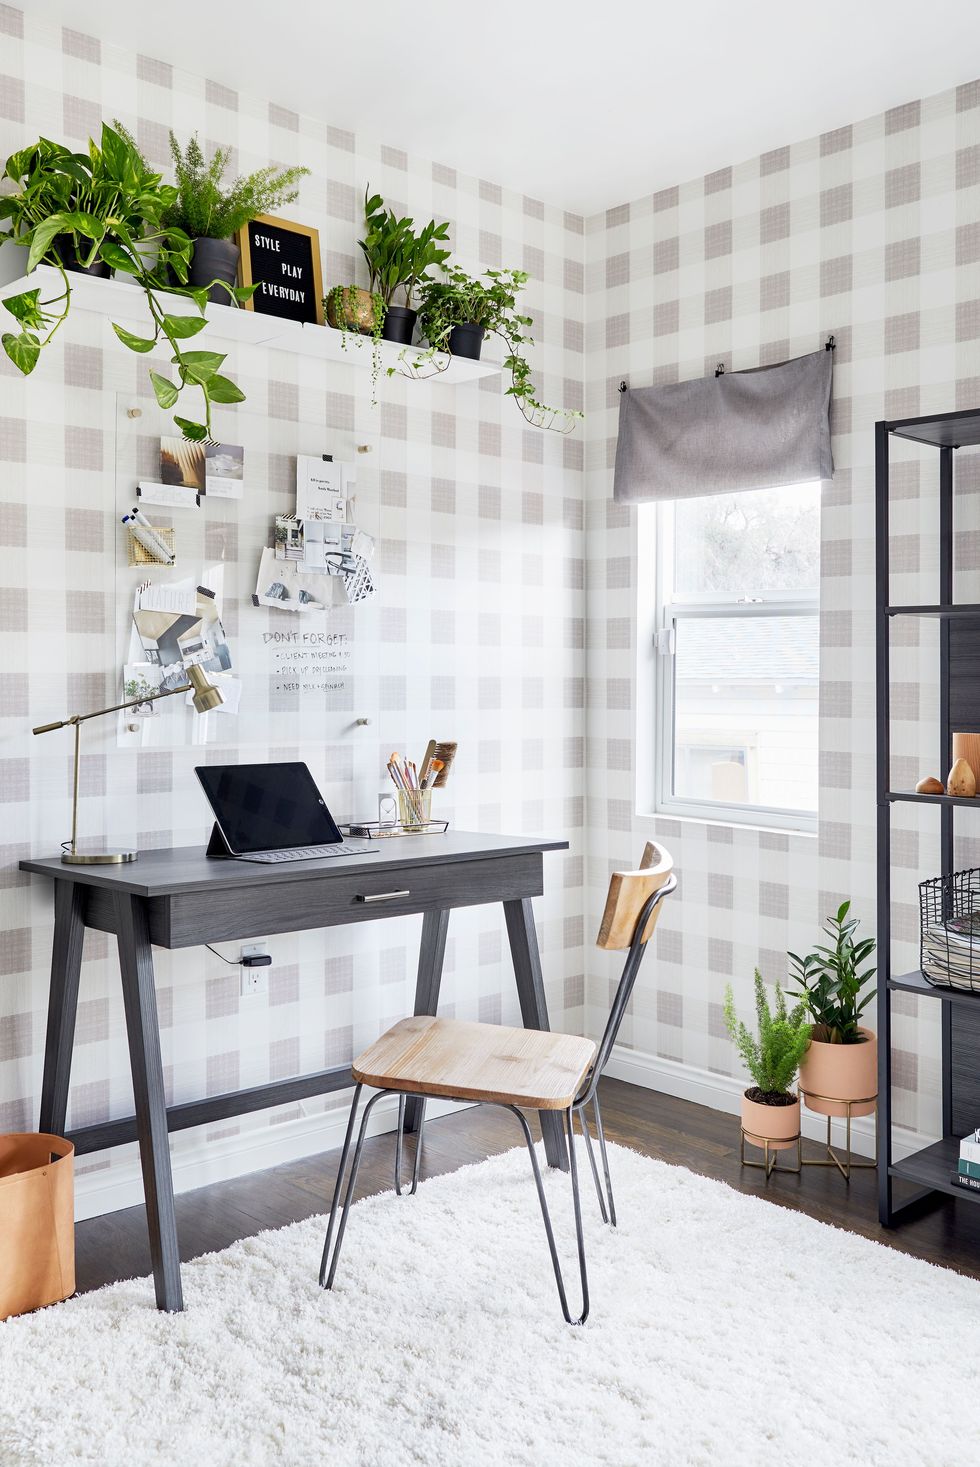 25 Desk Organization Ideas to Clear Up Your WFH Space